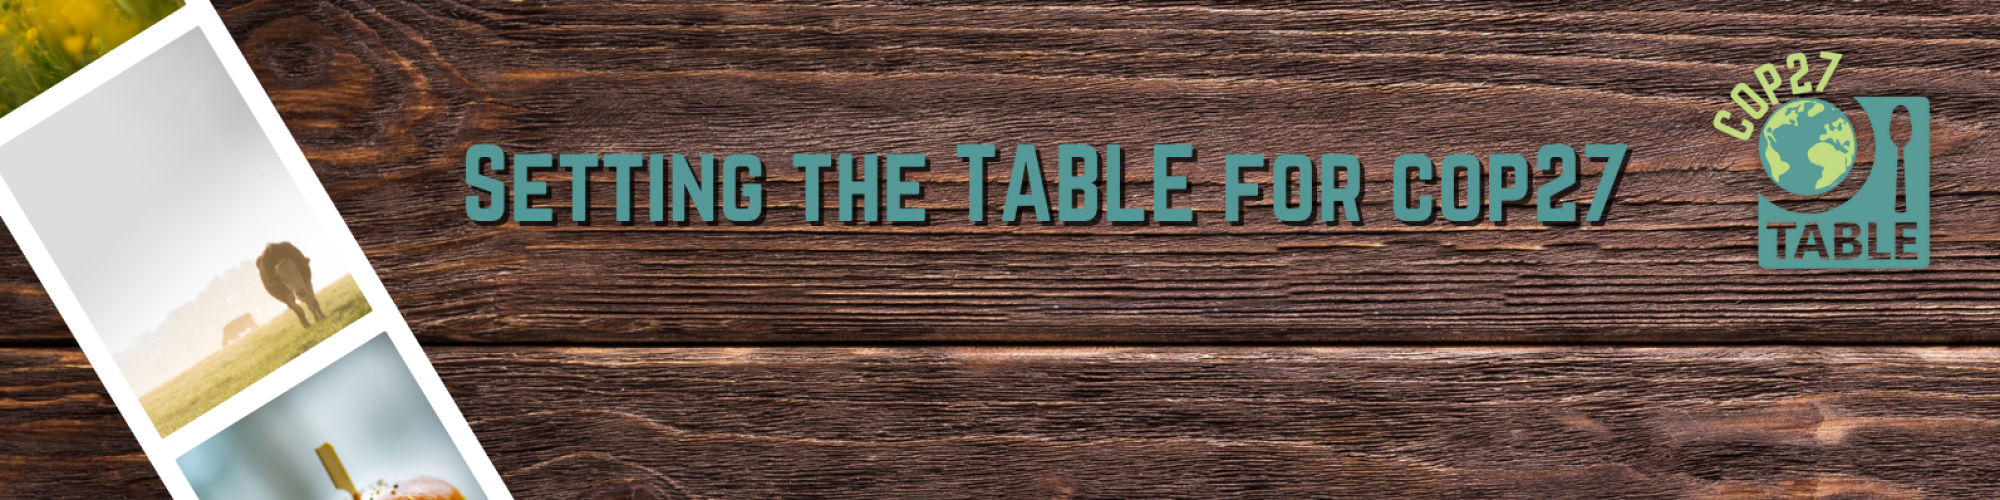 Banner for the "Setting the table for COP27" event series with images of cows in fields in a film strip on a wooden table background.